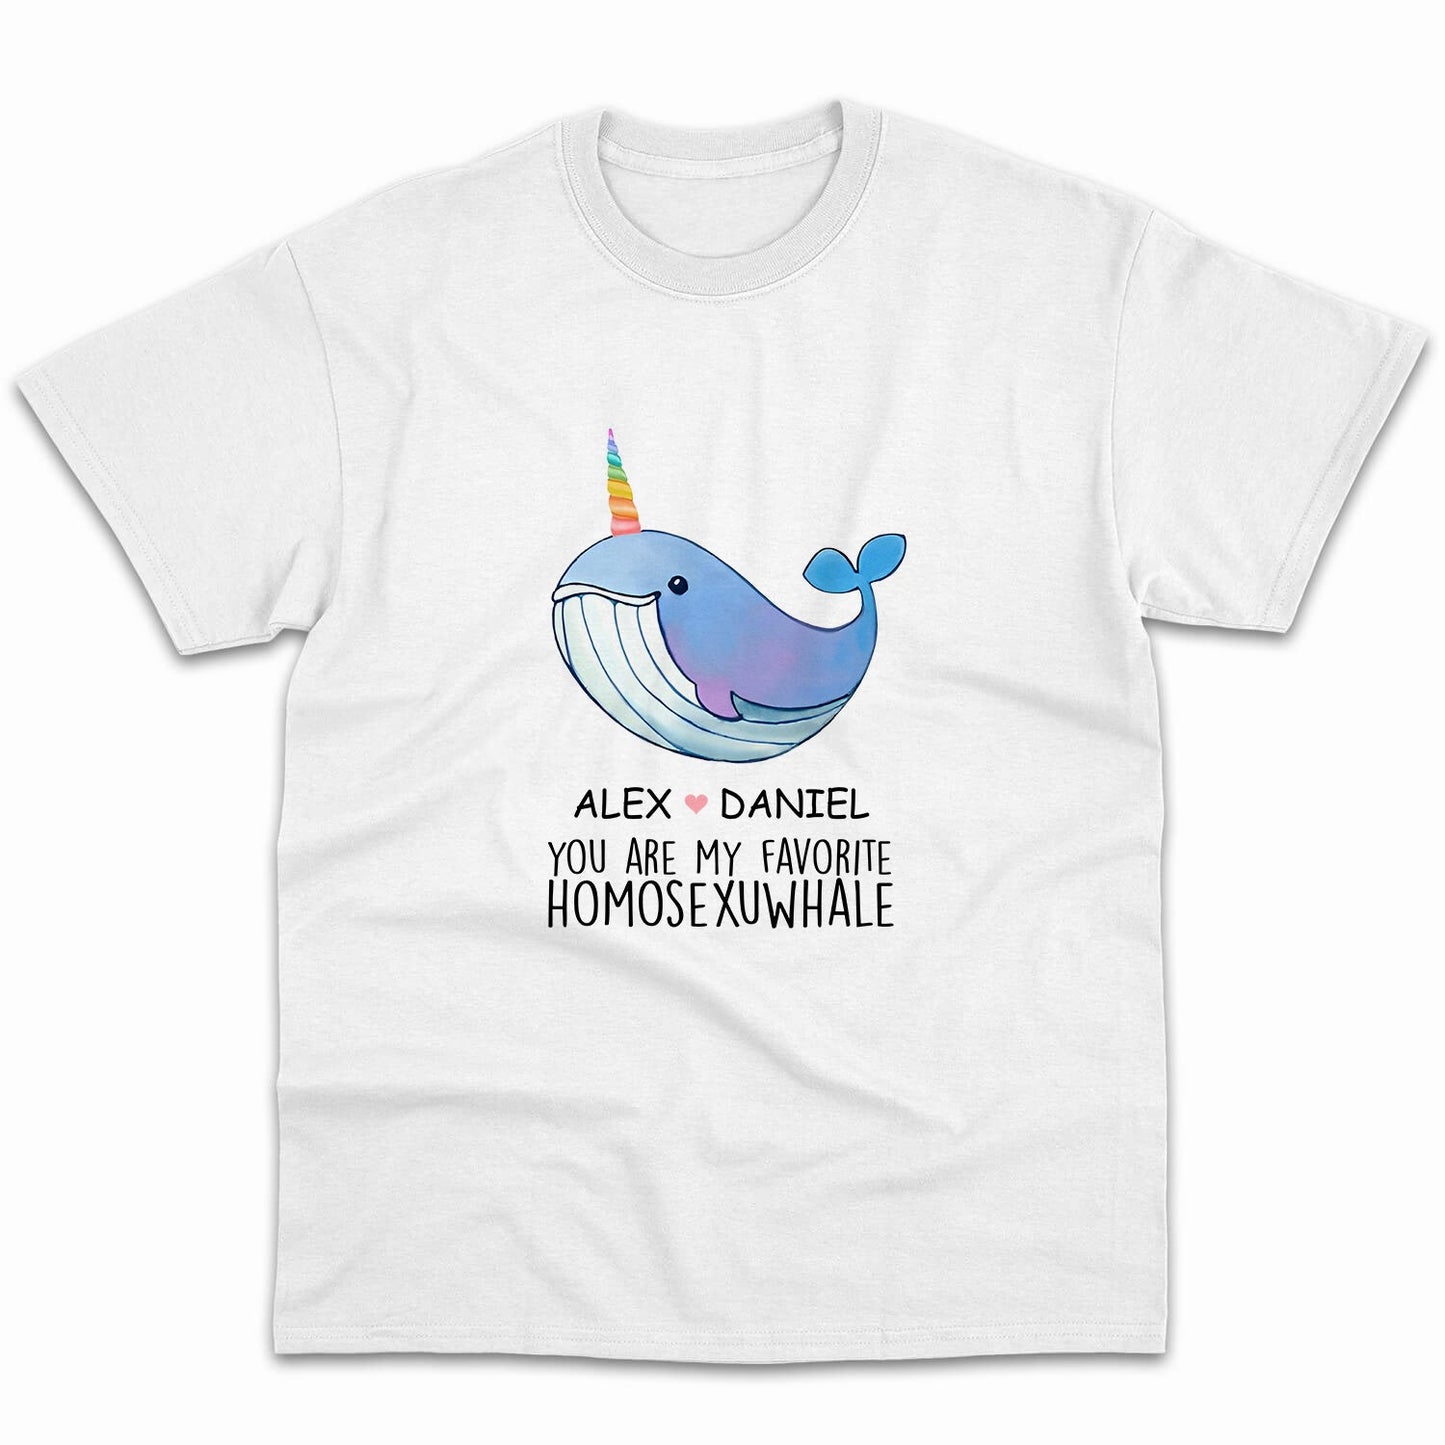 You Are My Favorite Homosexuwhale - Personalized Anniversary or Valentine's Day gift for him for her - Custom Mug - MyMindfulGifts